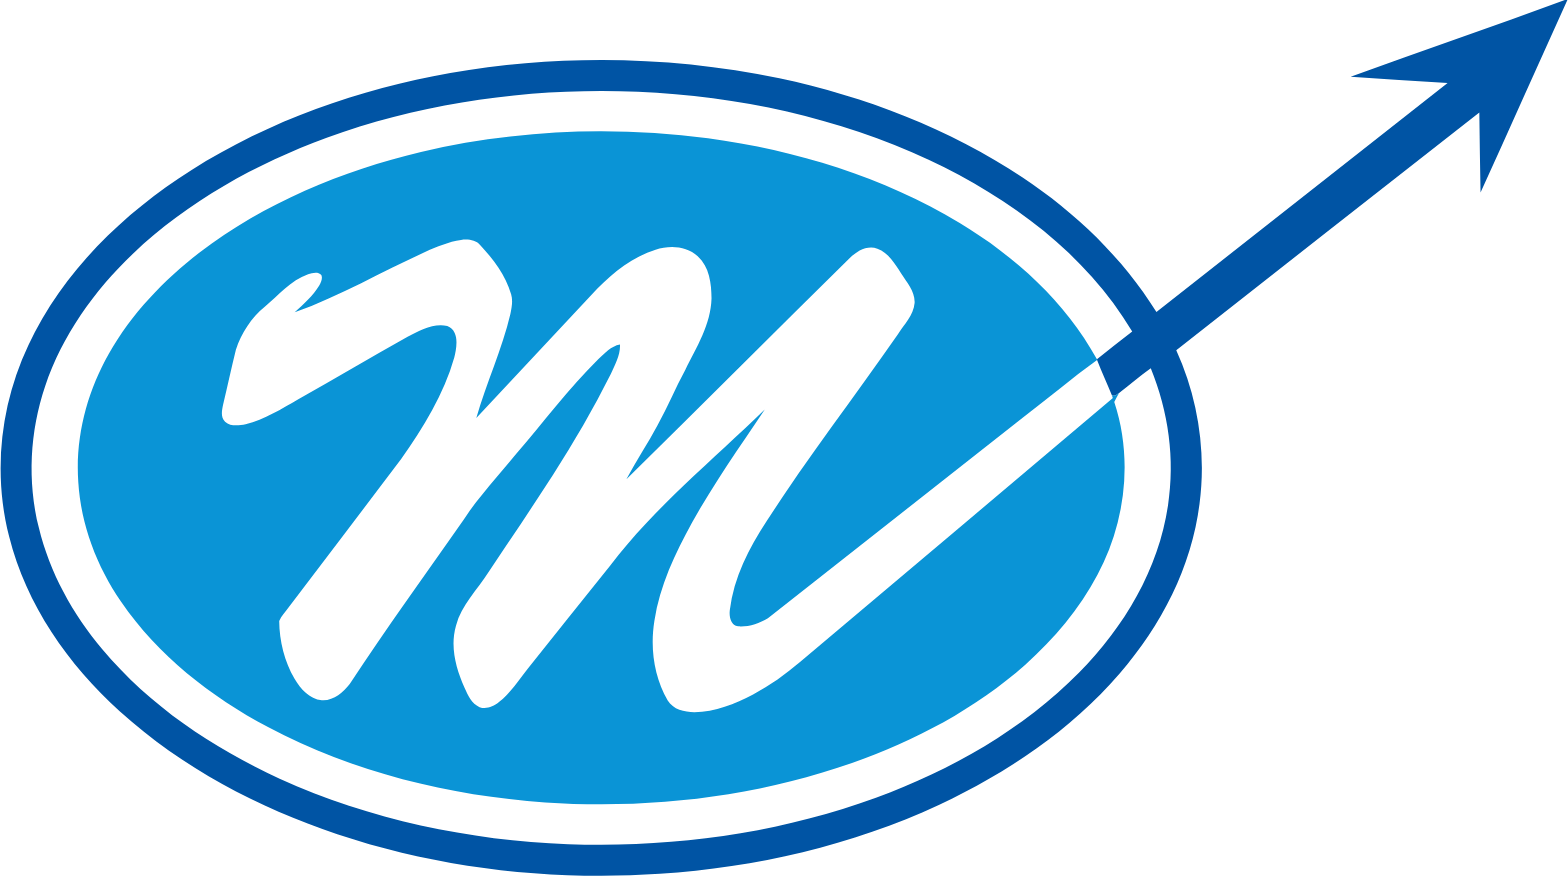 Mankind Pharma logo in transparent PNG and vectorized SVG formats